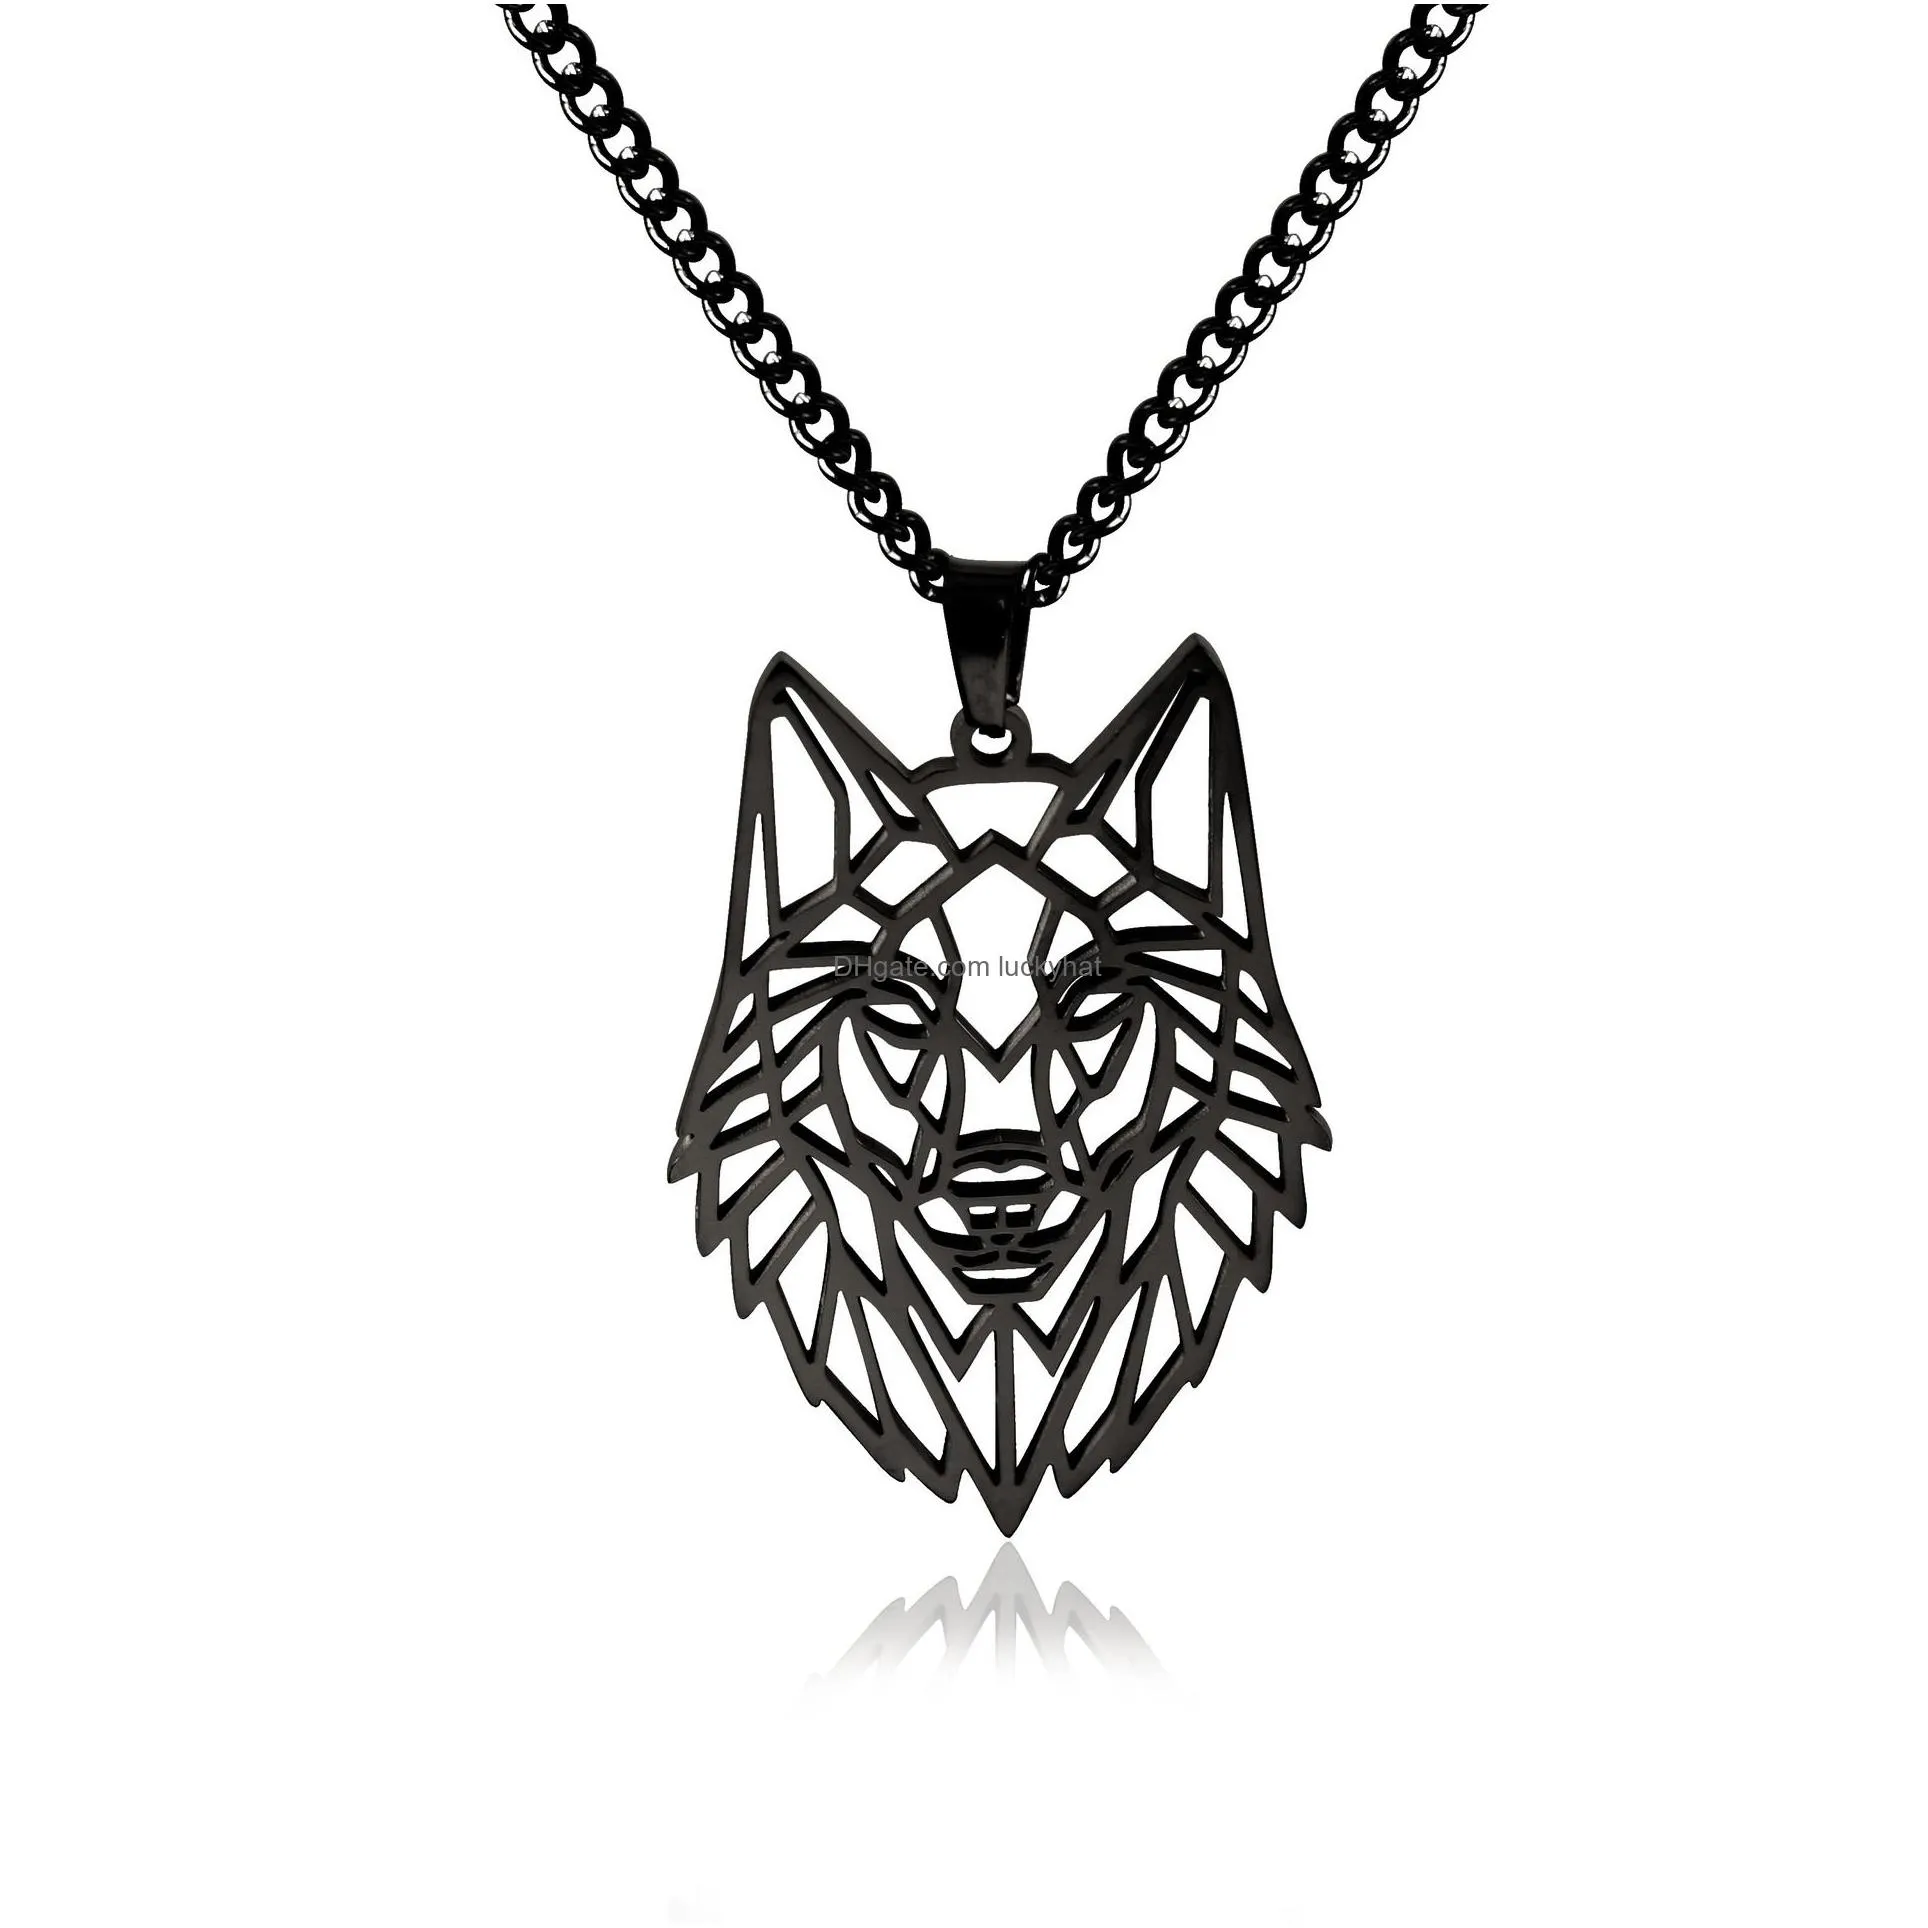 mens stainless steel wolf head necklace bold edgy punk style pendant jewelry for personality expression